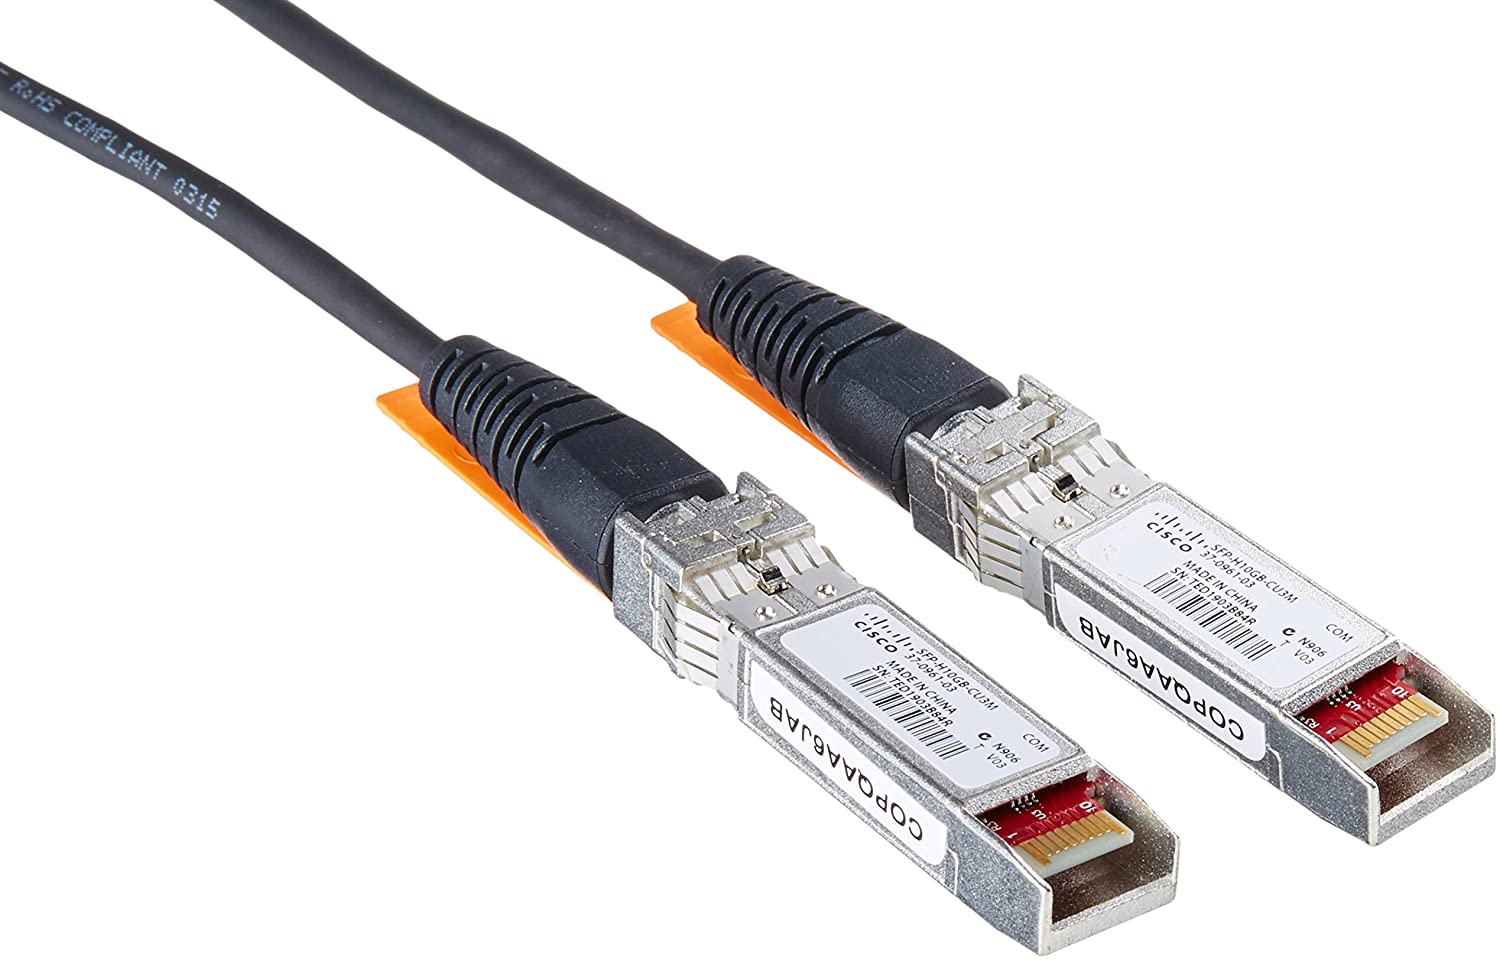 Bewinner 1 Meter/3.3ft Cable SFP to SFP DAC 10Gtek Type 25Gbps Cable for Routers Firewalls Network Cards Transceivers PVC Network Transceivers Cable 